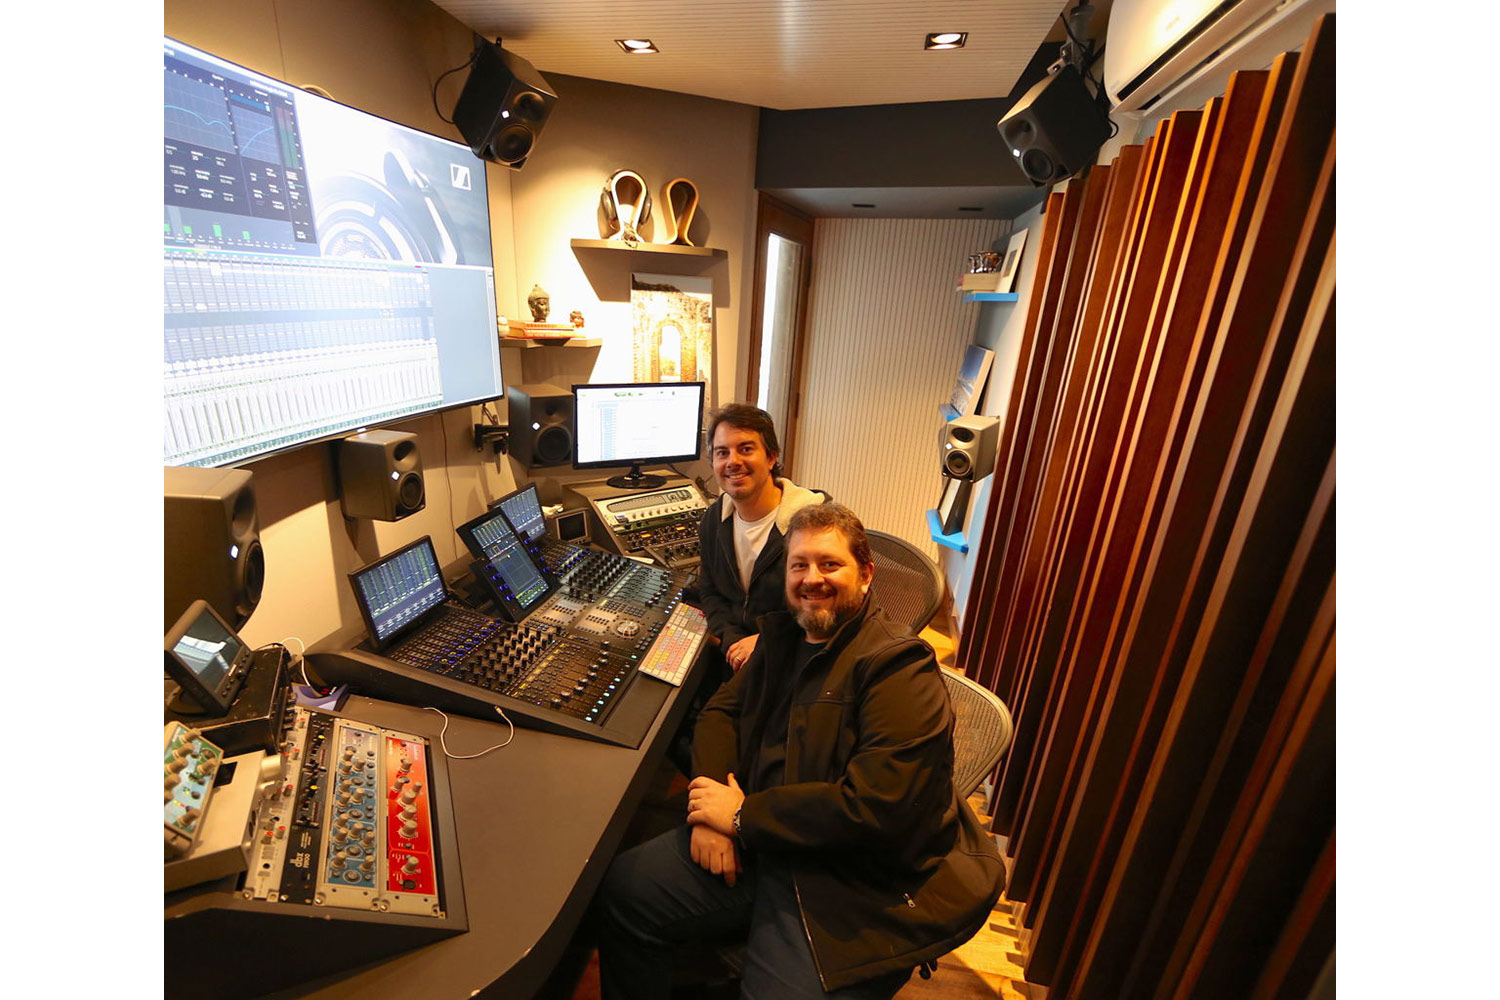 Mix2go is located in Sao Paulo, Brazil and is an innovative 3D mixing facility. WSDG was commissioned to design a space where 3D mixes audio could be created. Beto Neves and Daniel Reis.